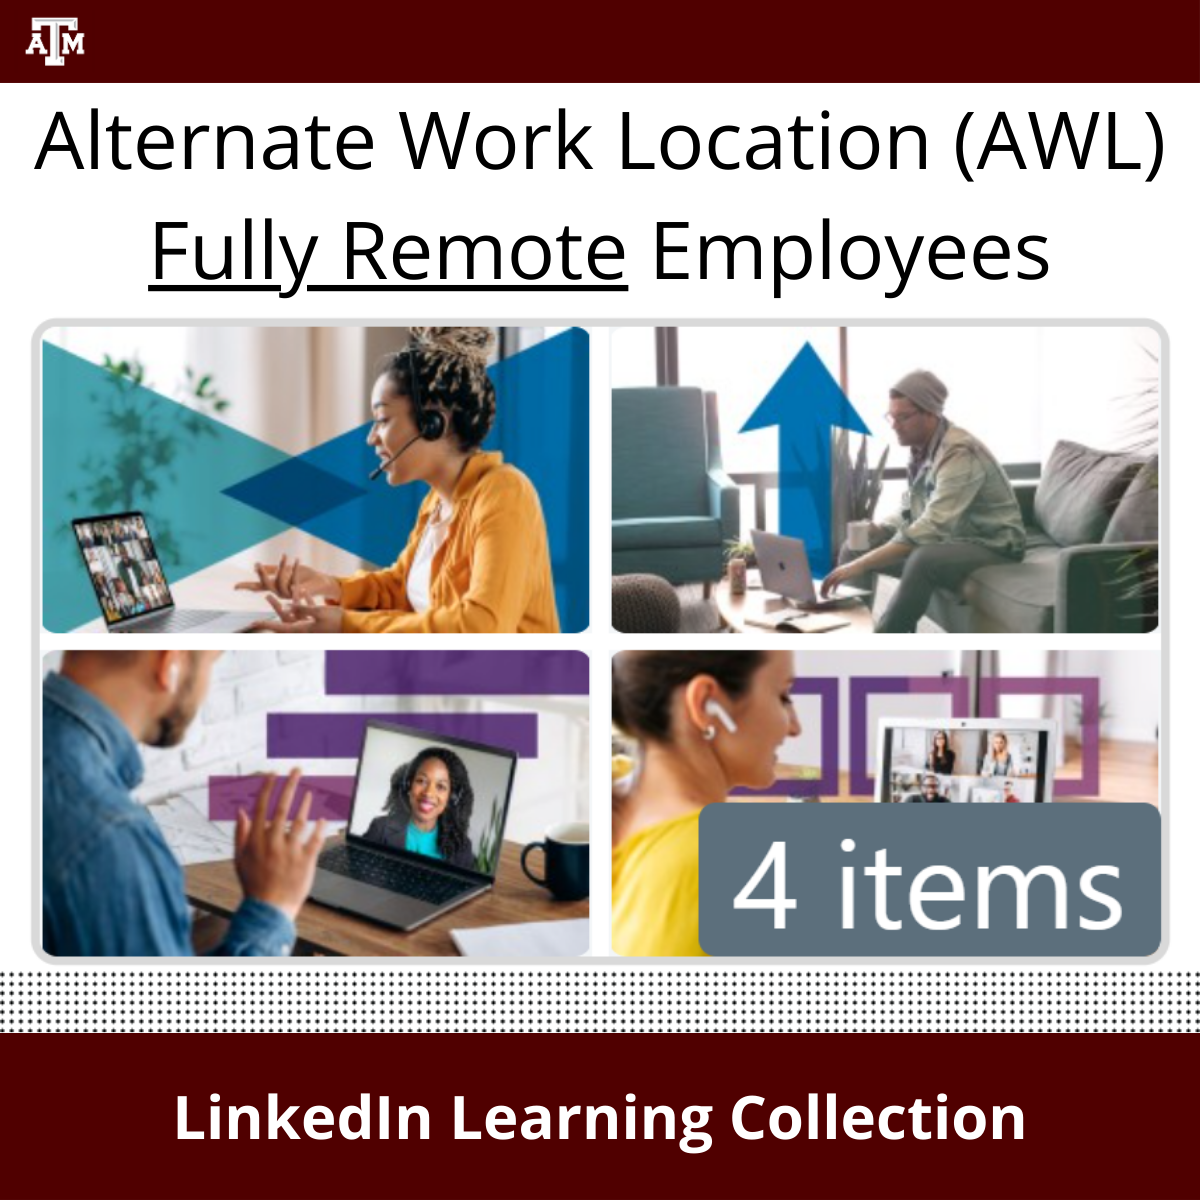 Alternate Work Location - Fully Remote Employees LinkedIn Learning Collection